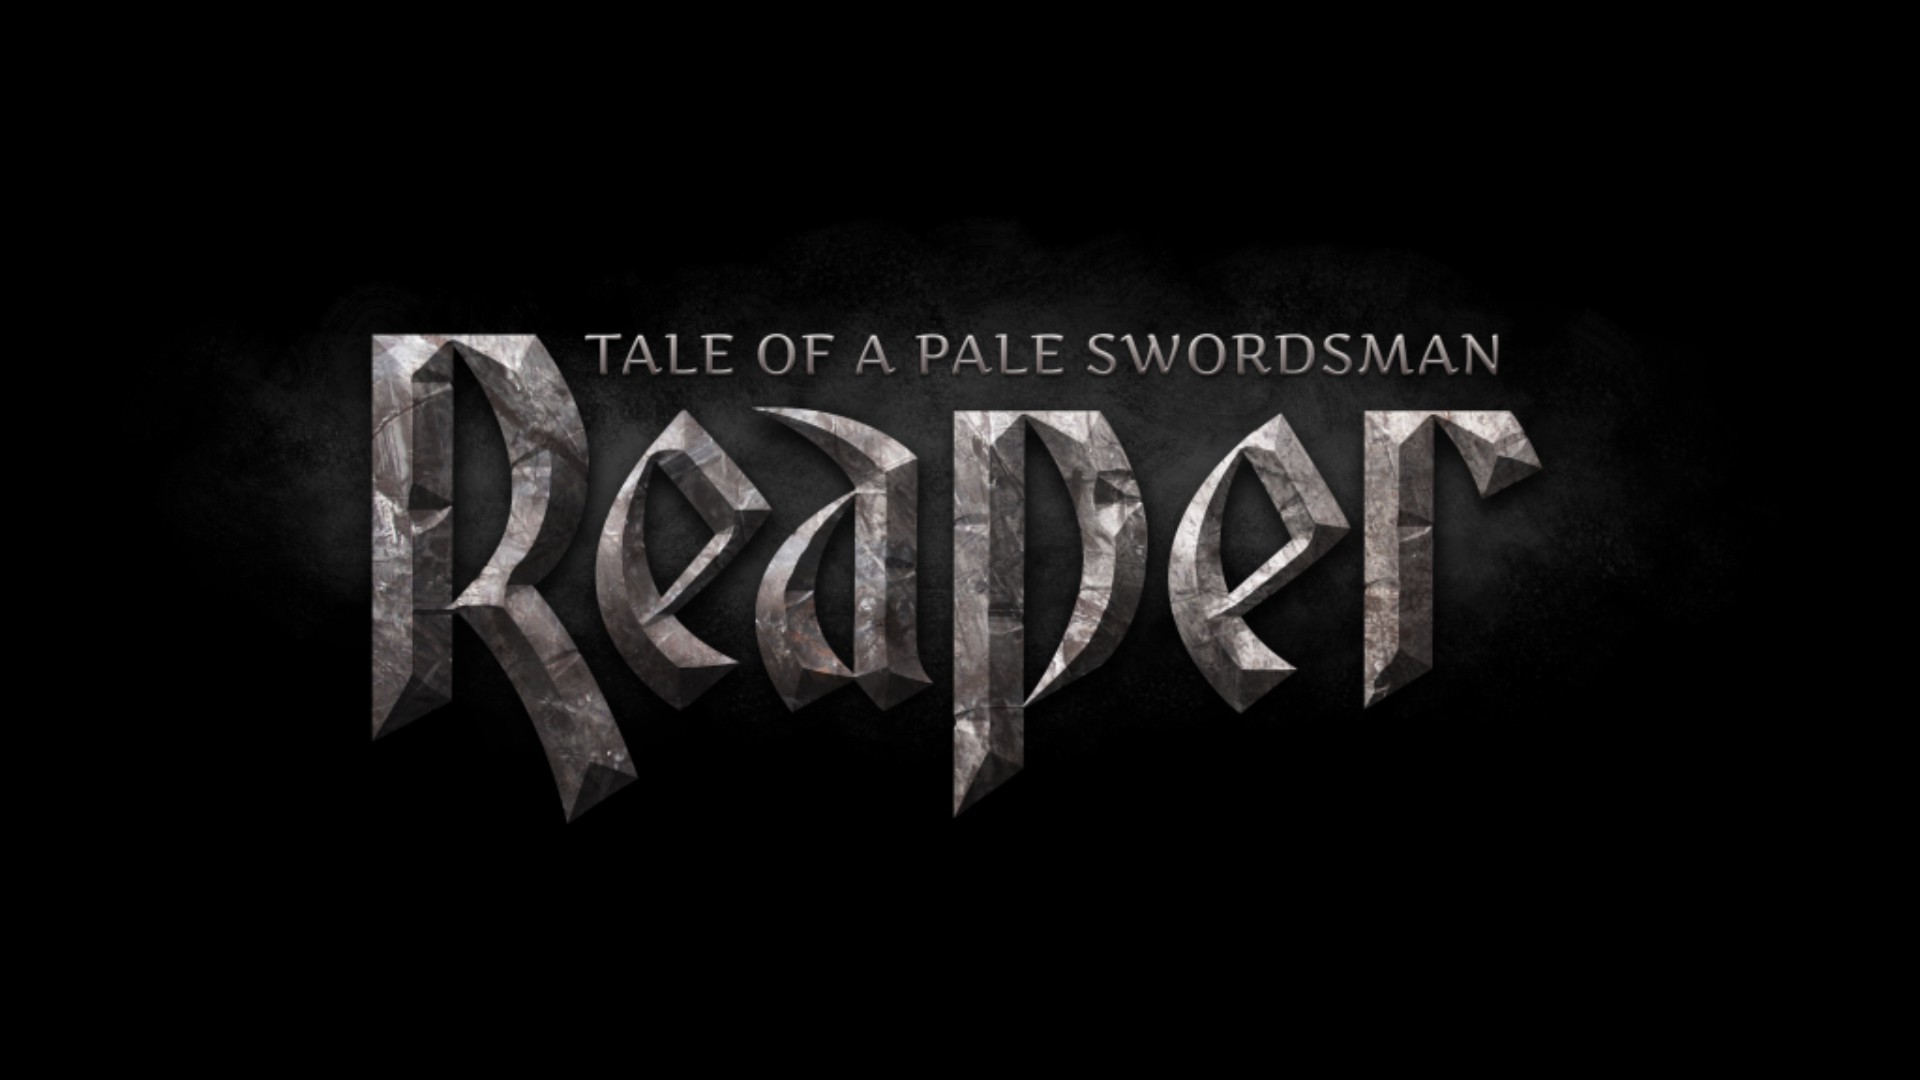 Video Game Reaper - Tale of a Pale Swordsman HD Wallpaper | Background Image